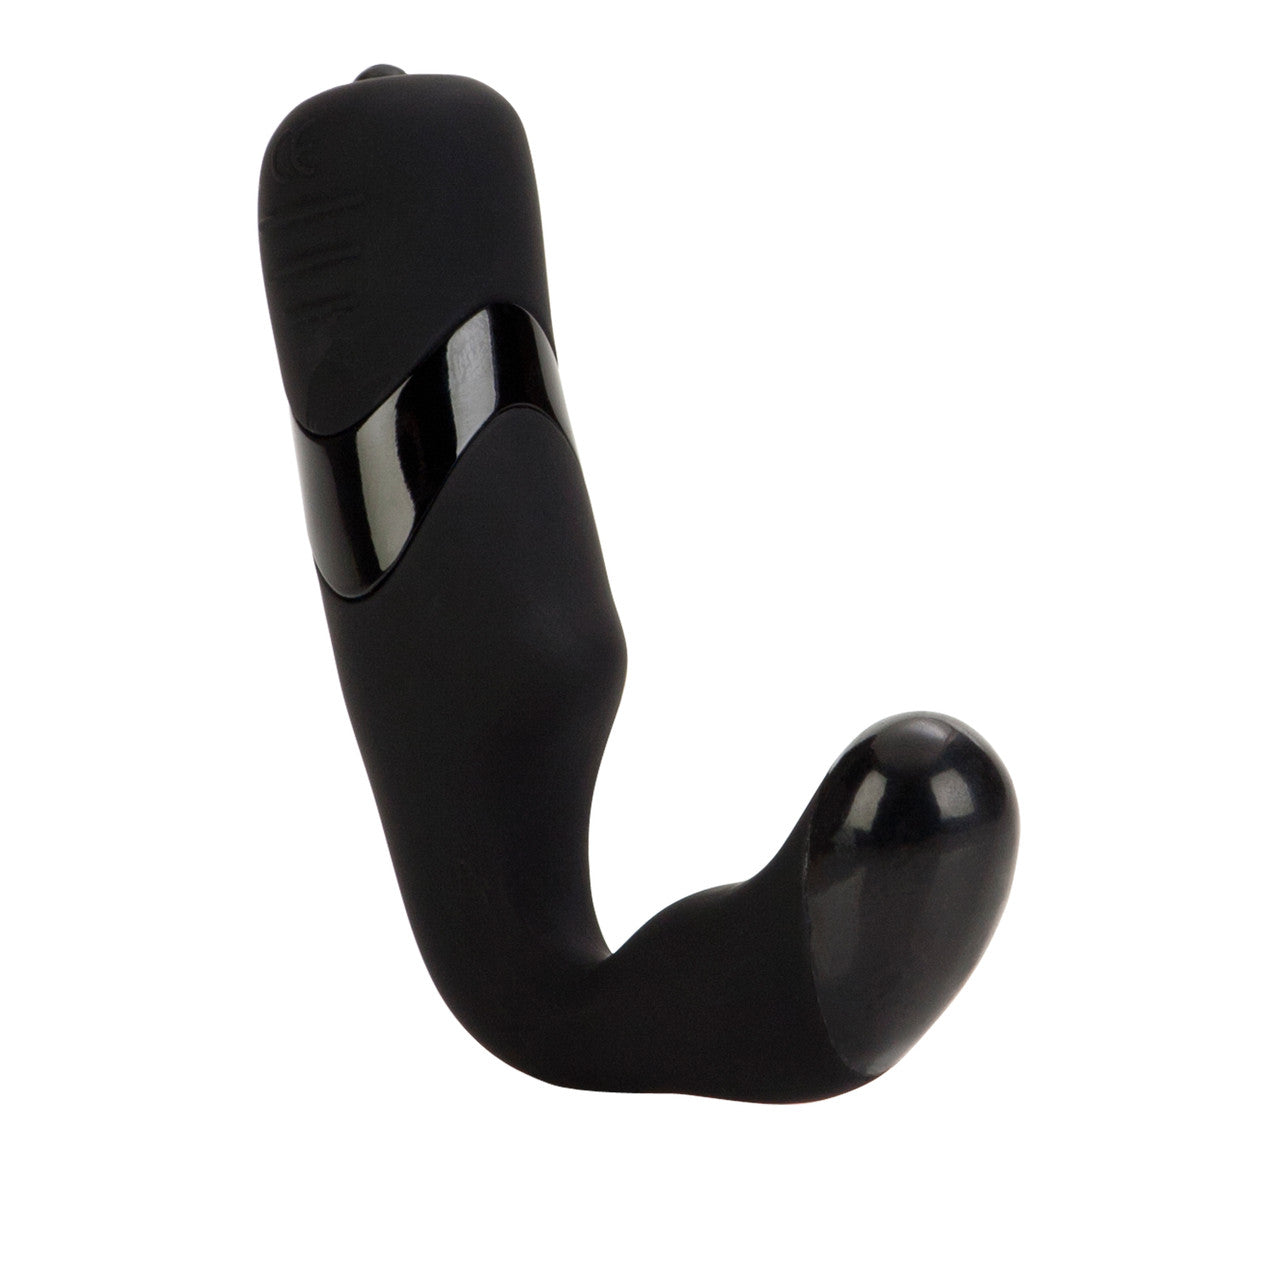 Dr. Joel Kaplan Compact Prostate Massager - Thorn & Feather